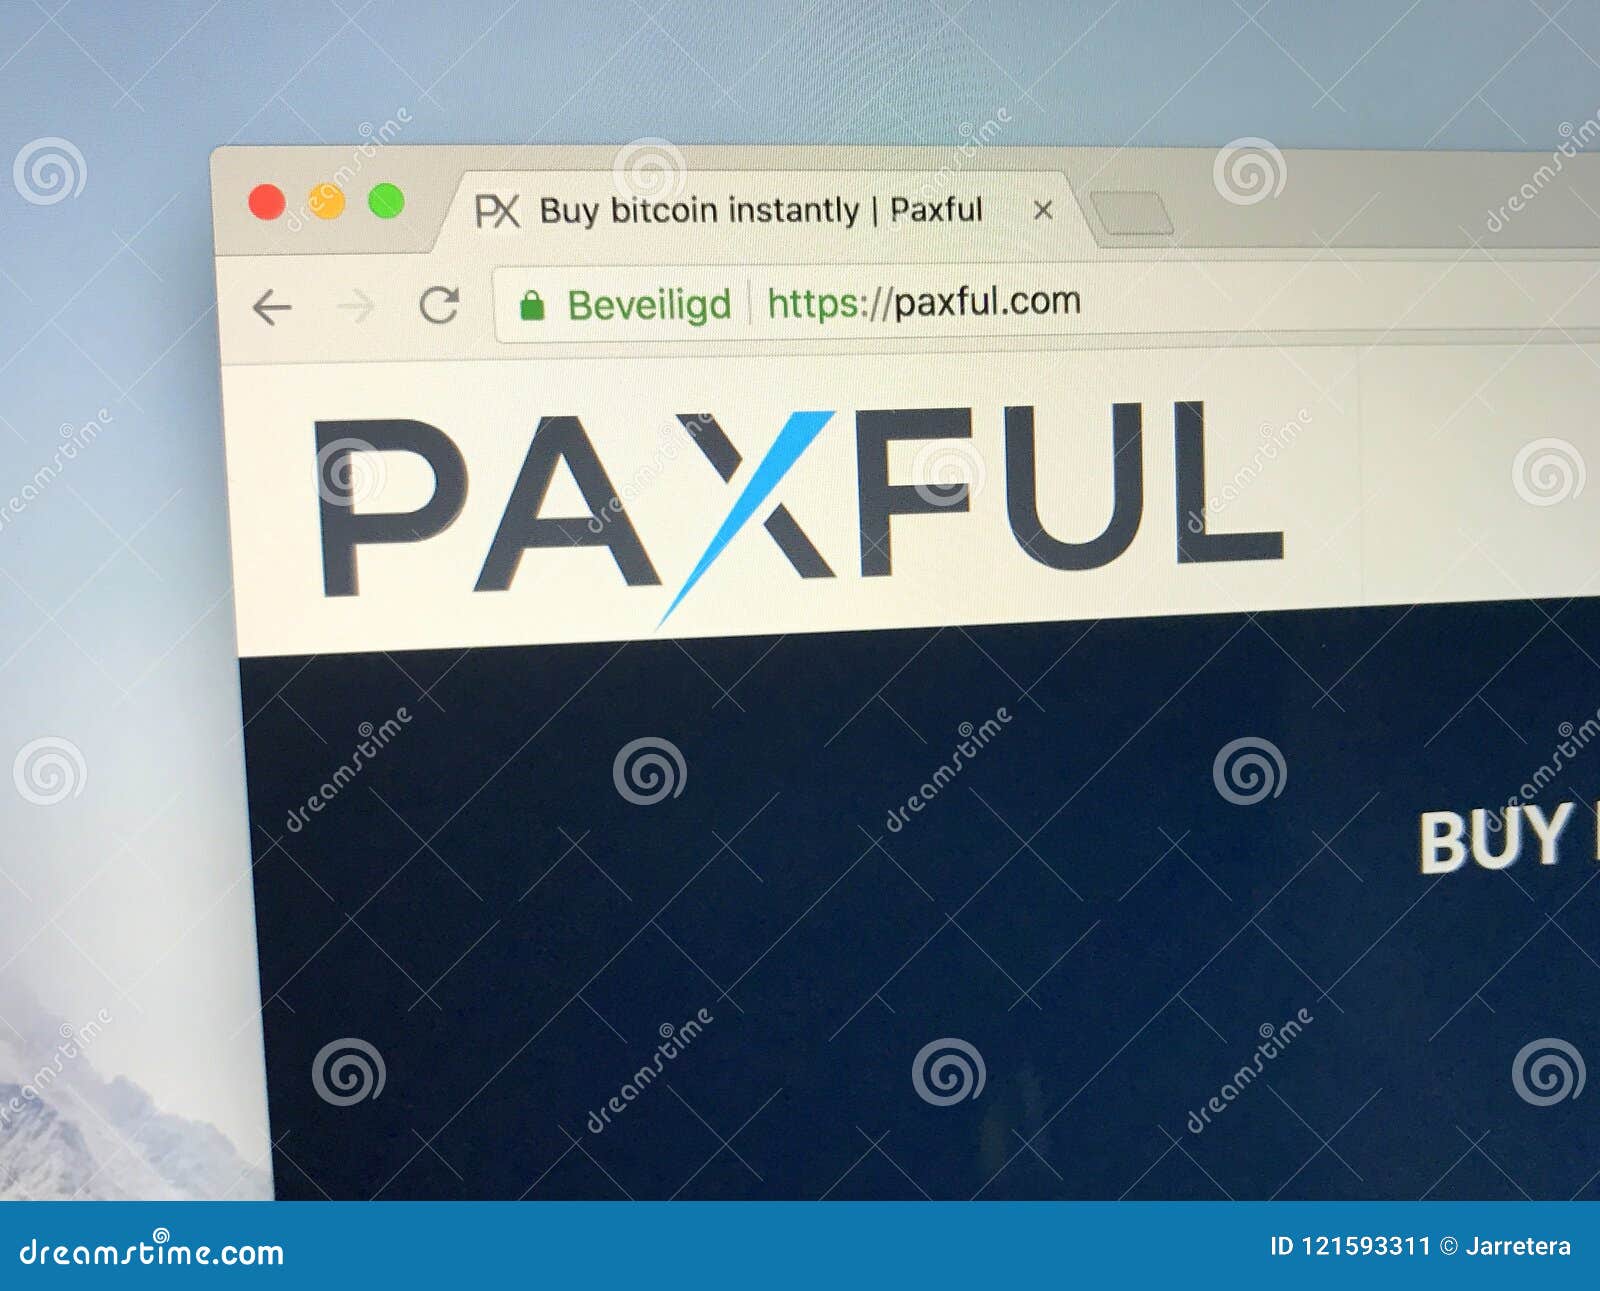 Homepage Of Paxful Bitcoin Exchange Editorial Photo Image Of Home - 